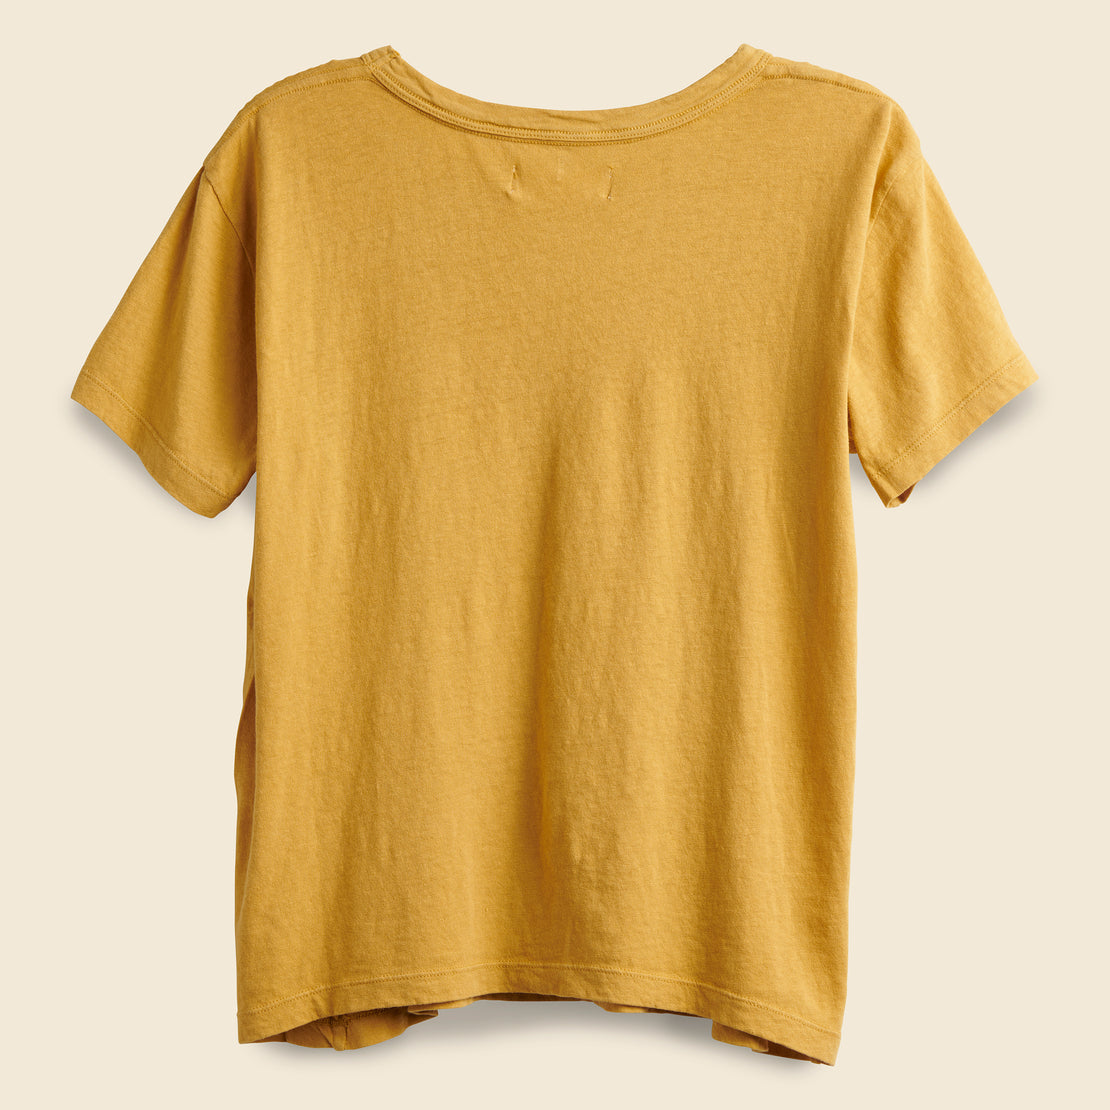 Drop Tee - Mustard - Imogene + Willie - STAG Provisions - W - Tops - S/S Tee